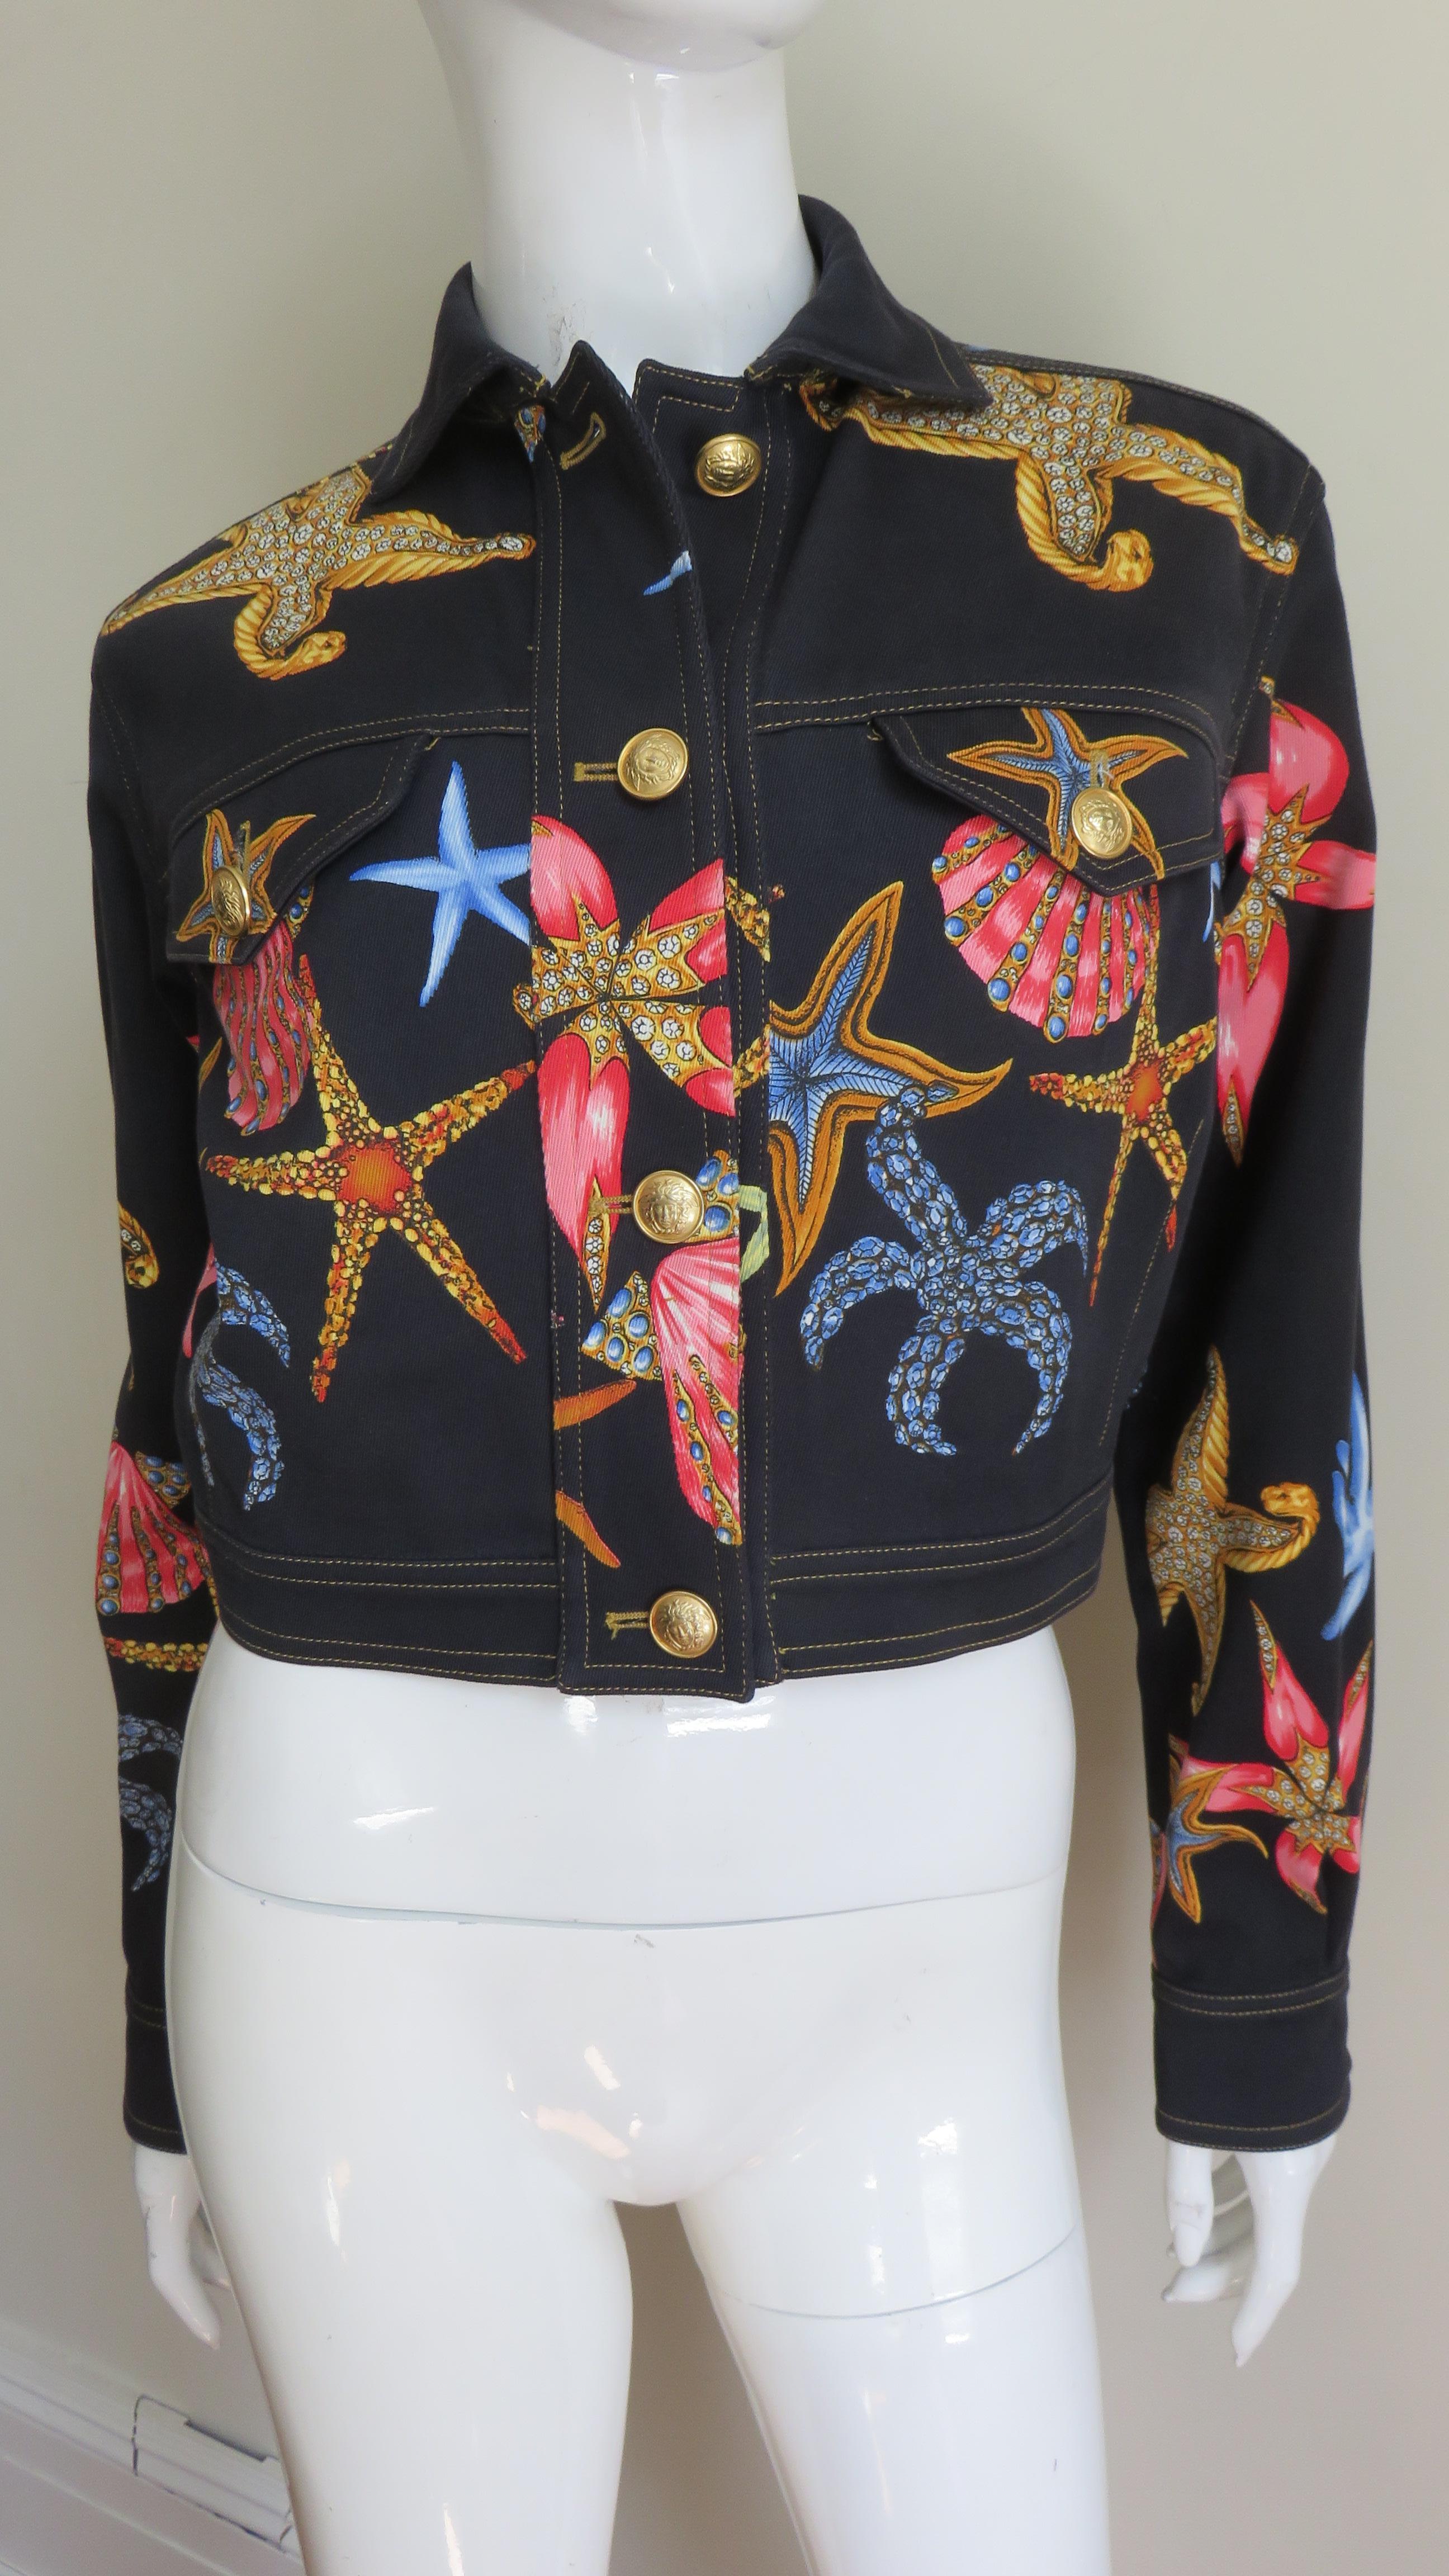 A beautiful black cotton jacket with a colorful starfish and shells pattern from Gianni Versace's much photographed, notable Spring Summer 1992 collection.  It has 2 front flap breast pockets which along with the cuffs and the front of the jacket